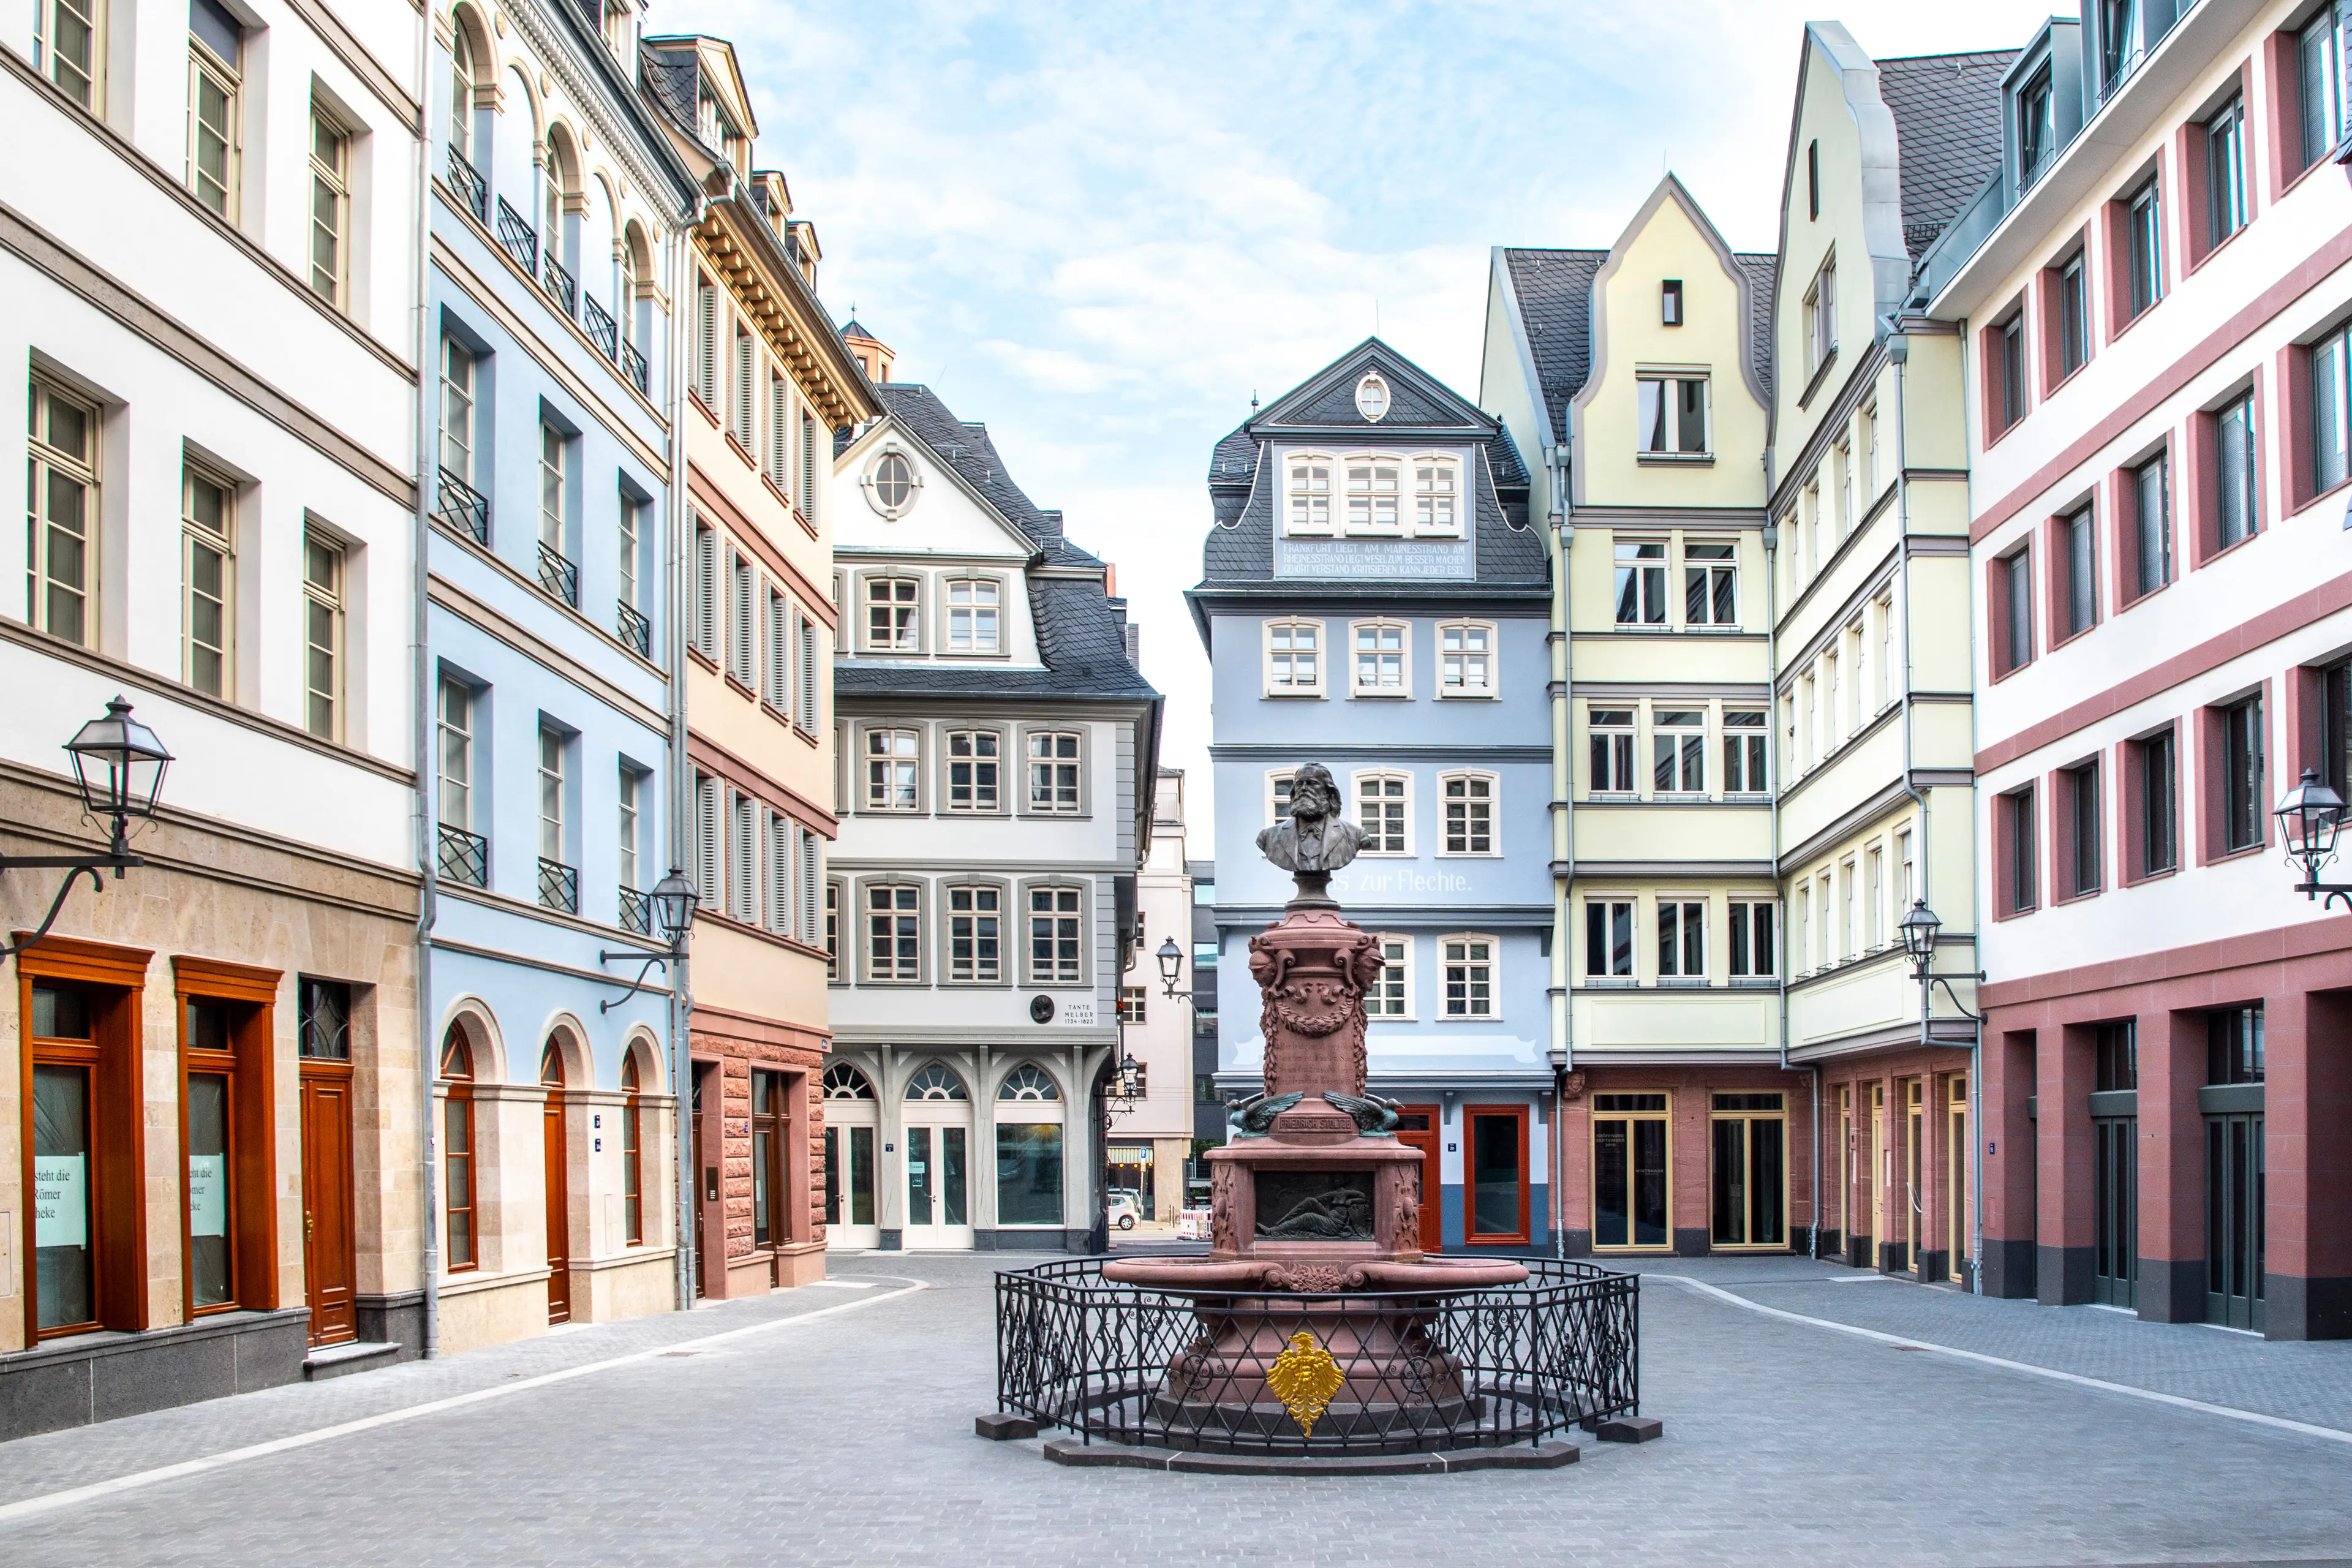 3-Day Ultimate Travel Itinerary to Frankfurt, Germany